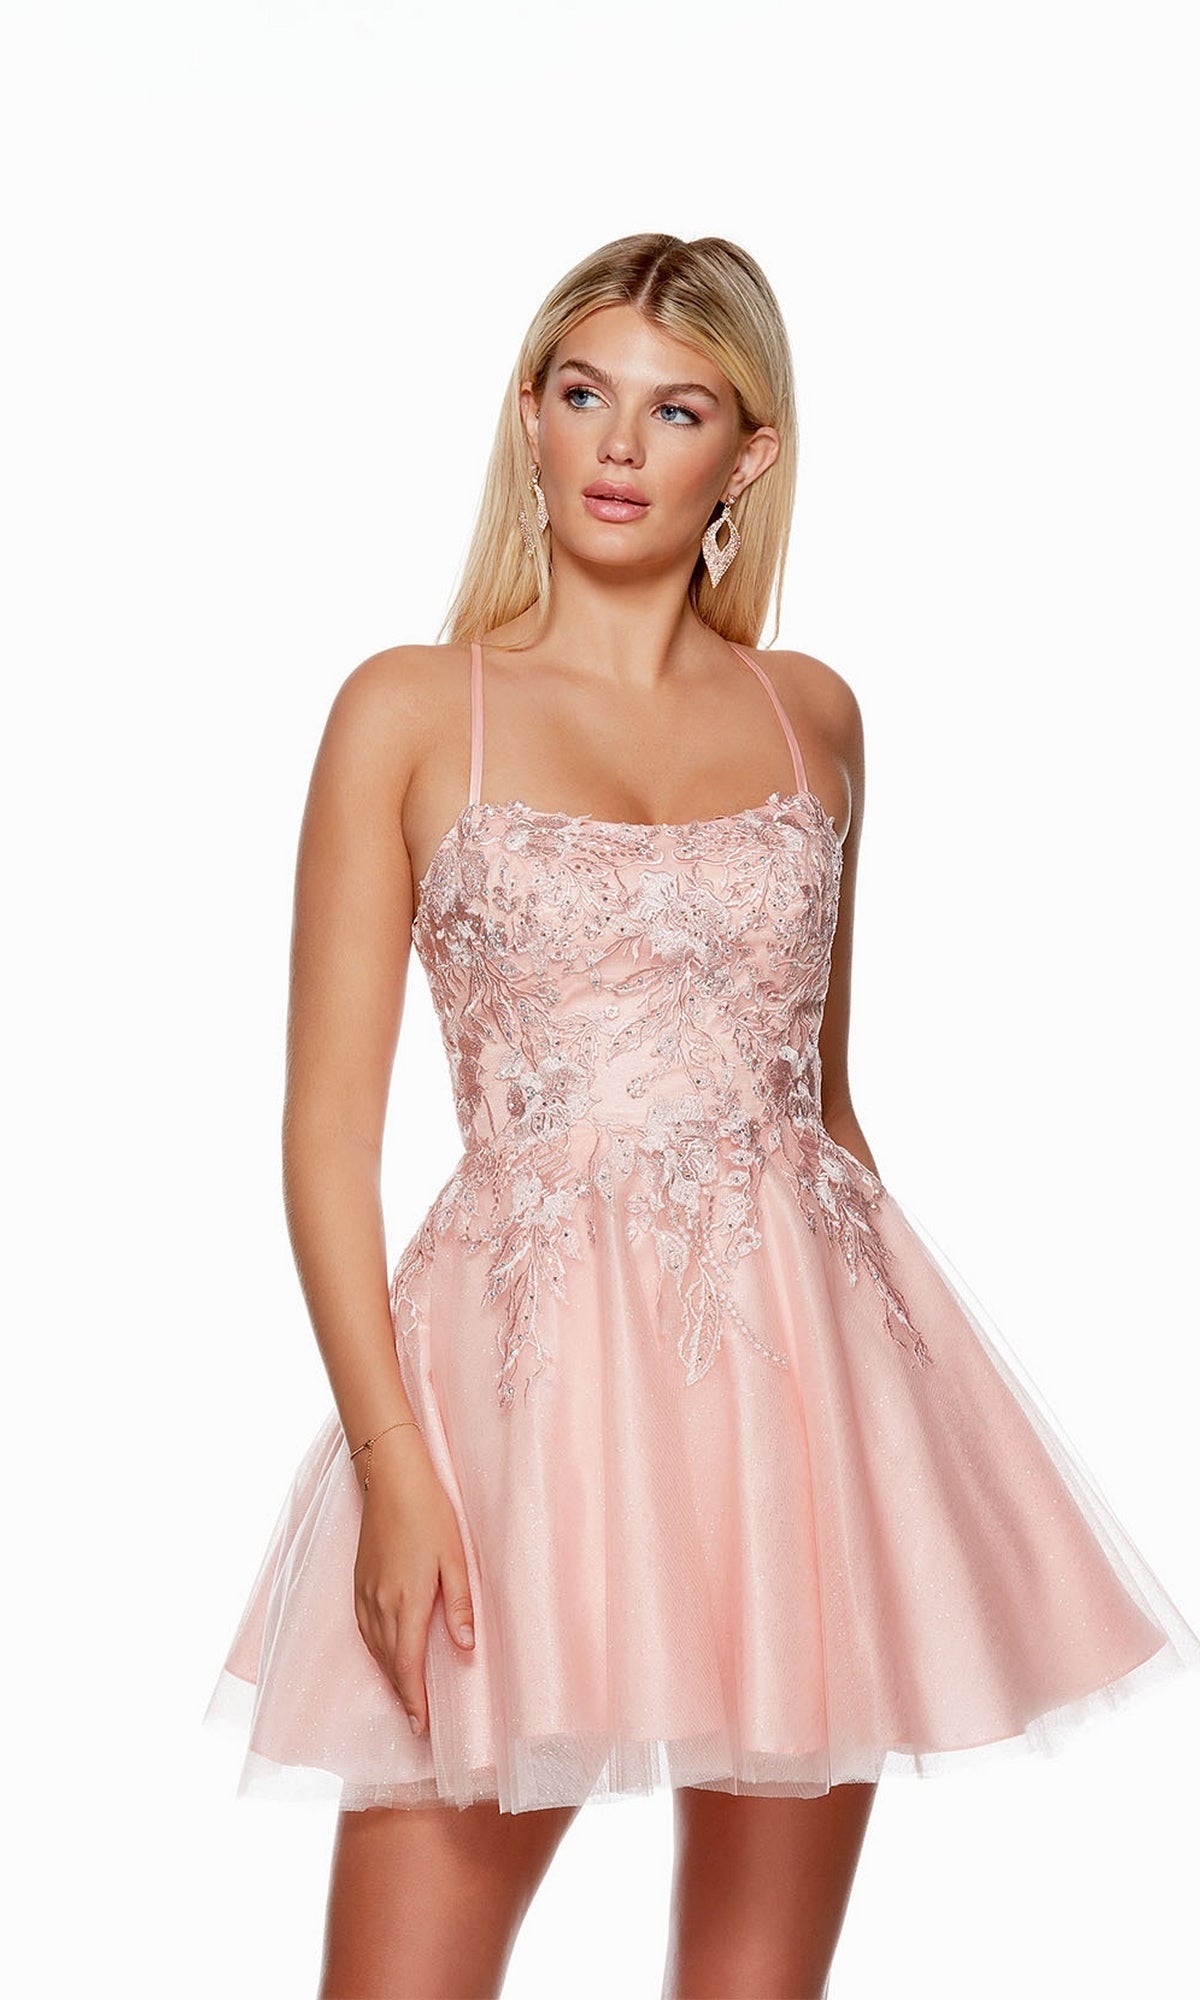 Blush Short Dress By Alyce For Homecoming 3152